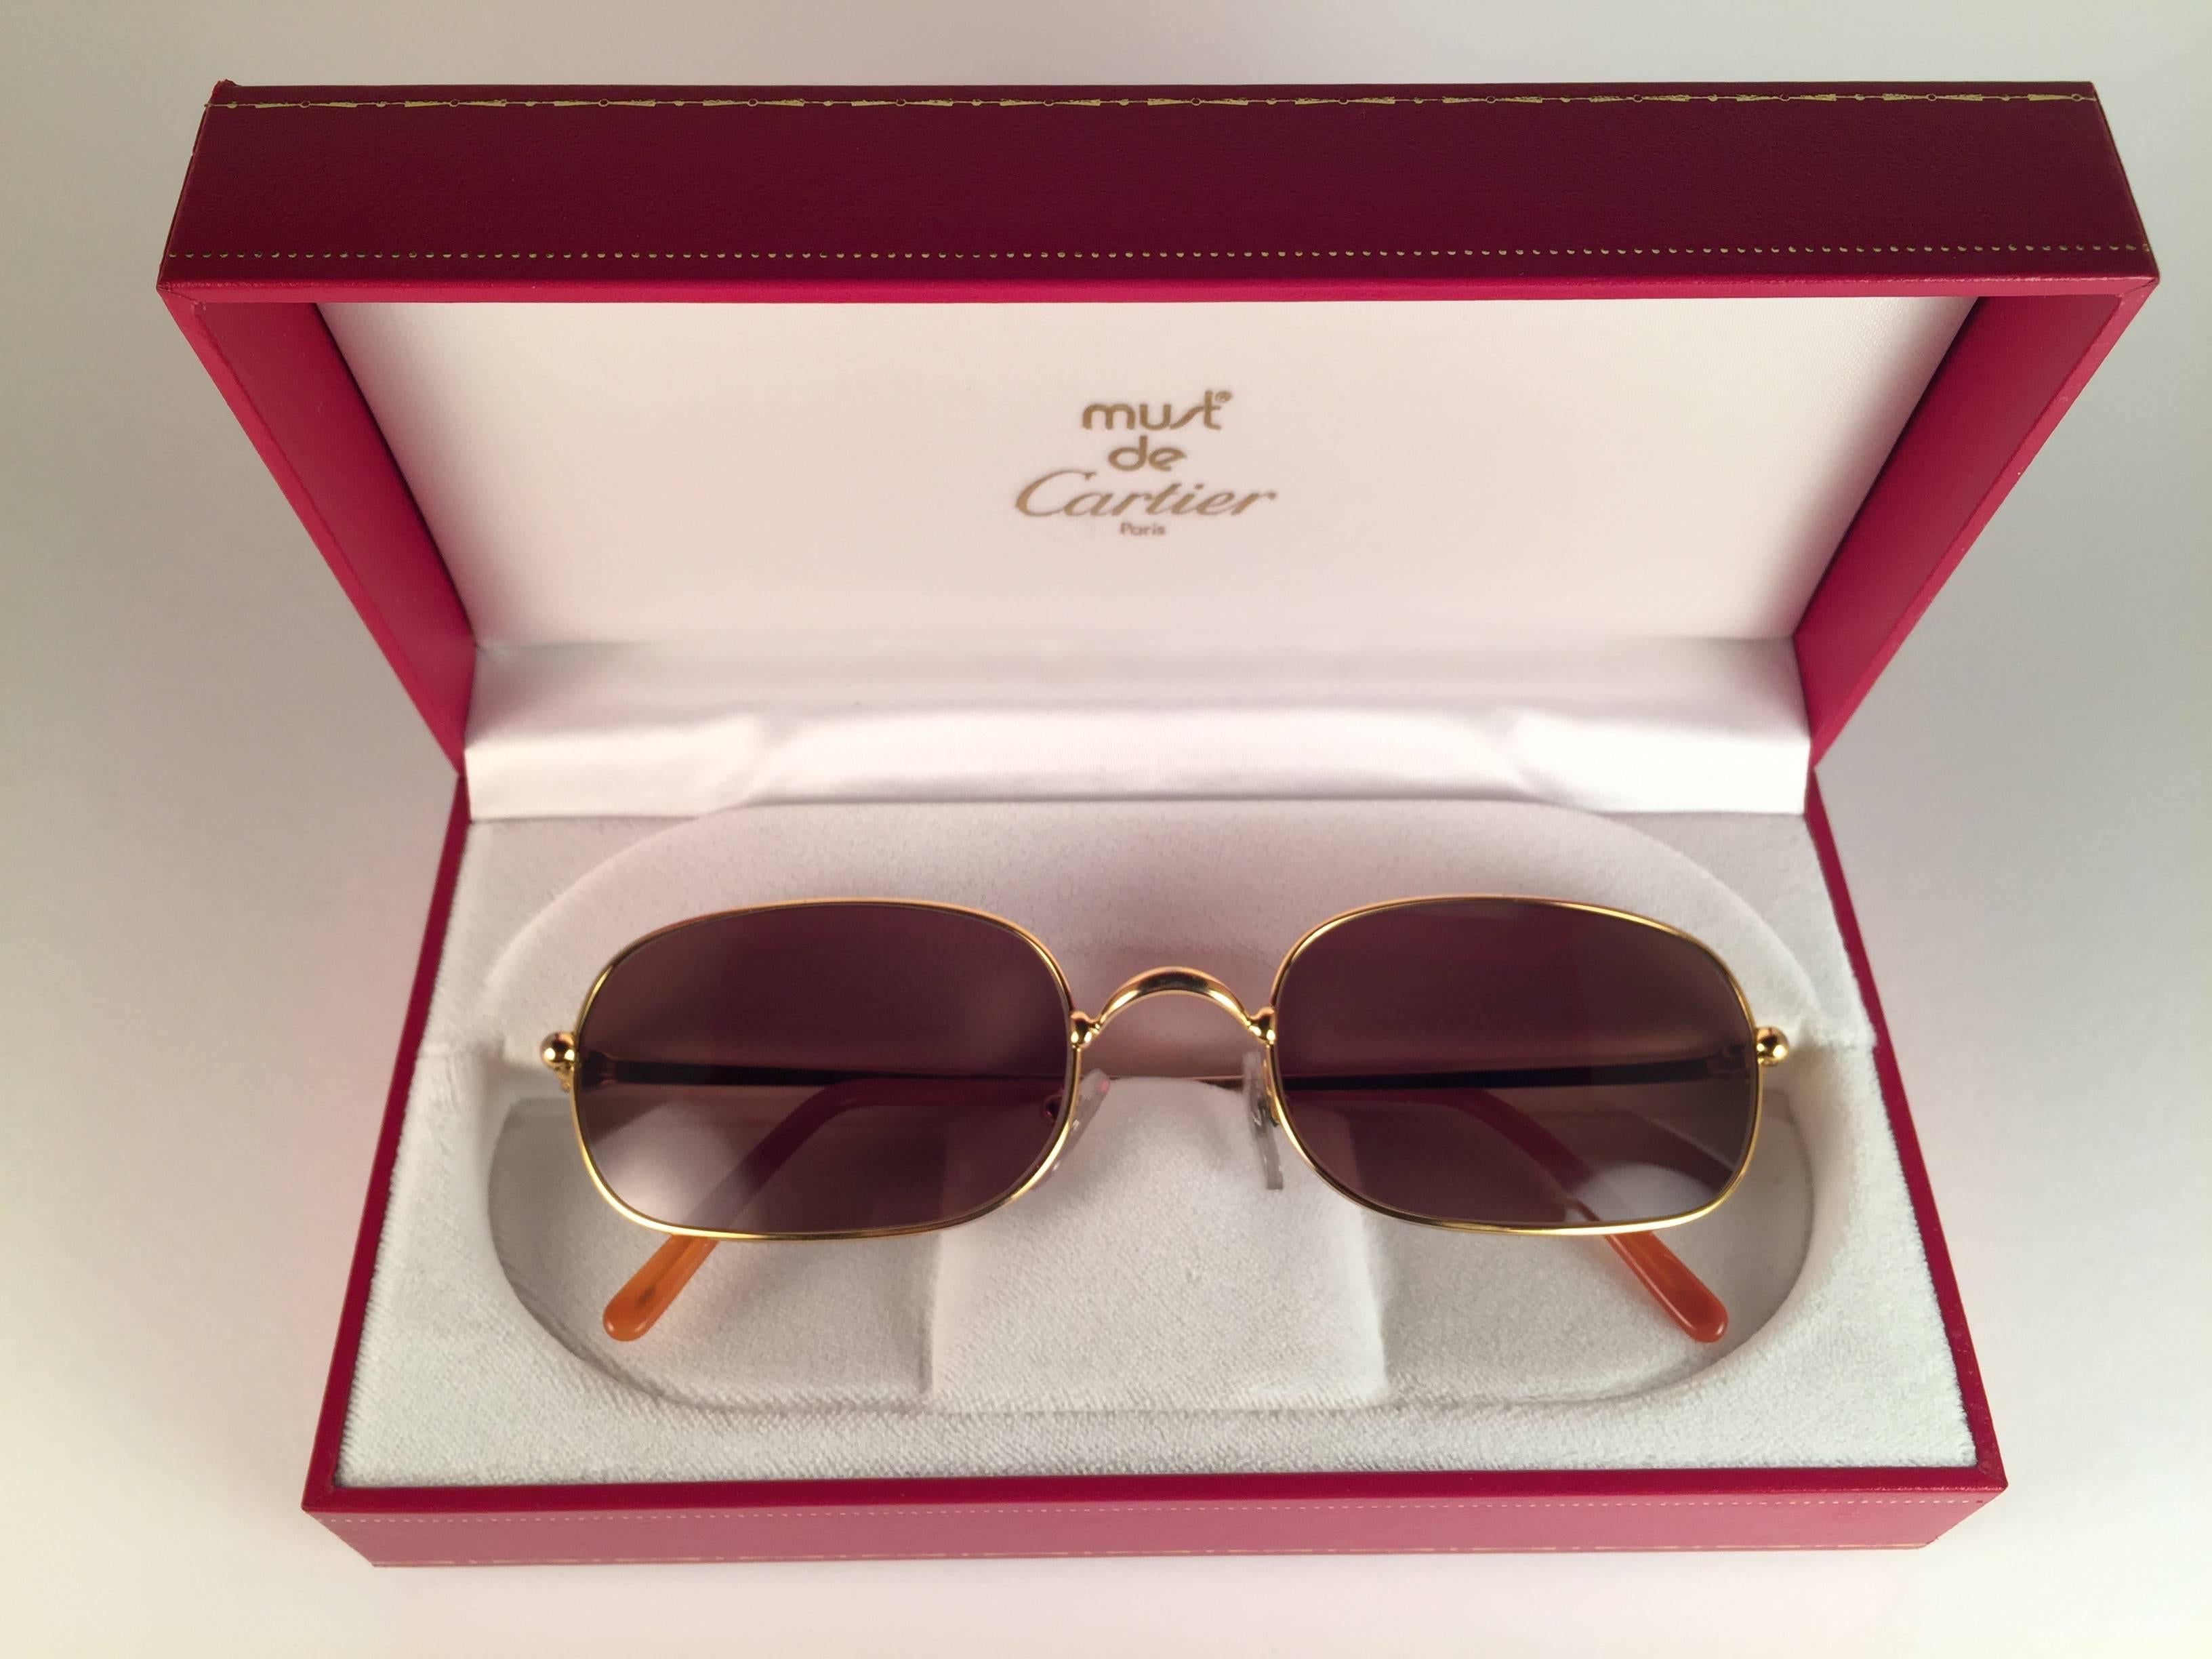 NEW 1990 Cartier DeimIos 54 MM Sunglasses with brown (uv protection) lenses.  All hallmarks. Cartier gold signs on the ear paddles. These are like a pair of jewels on your nose. Beautiful design and a real sign of the times. Original Cartier hard